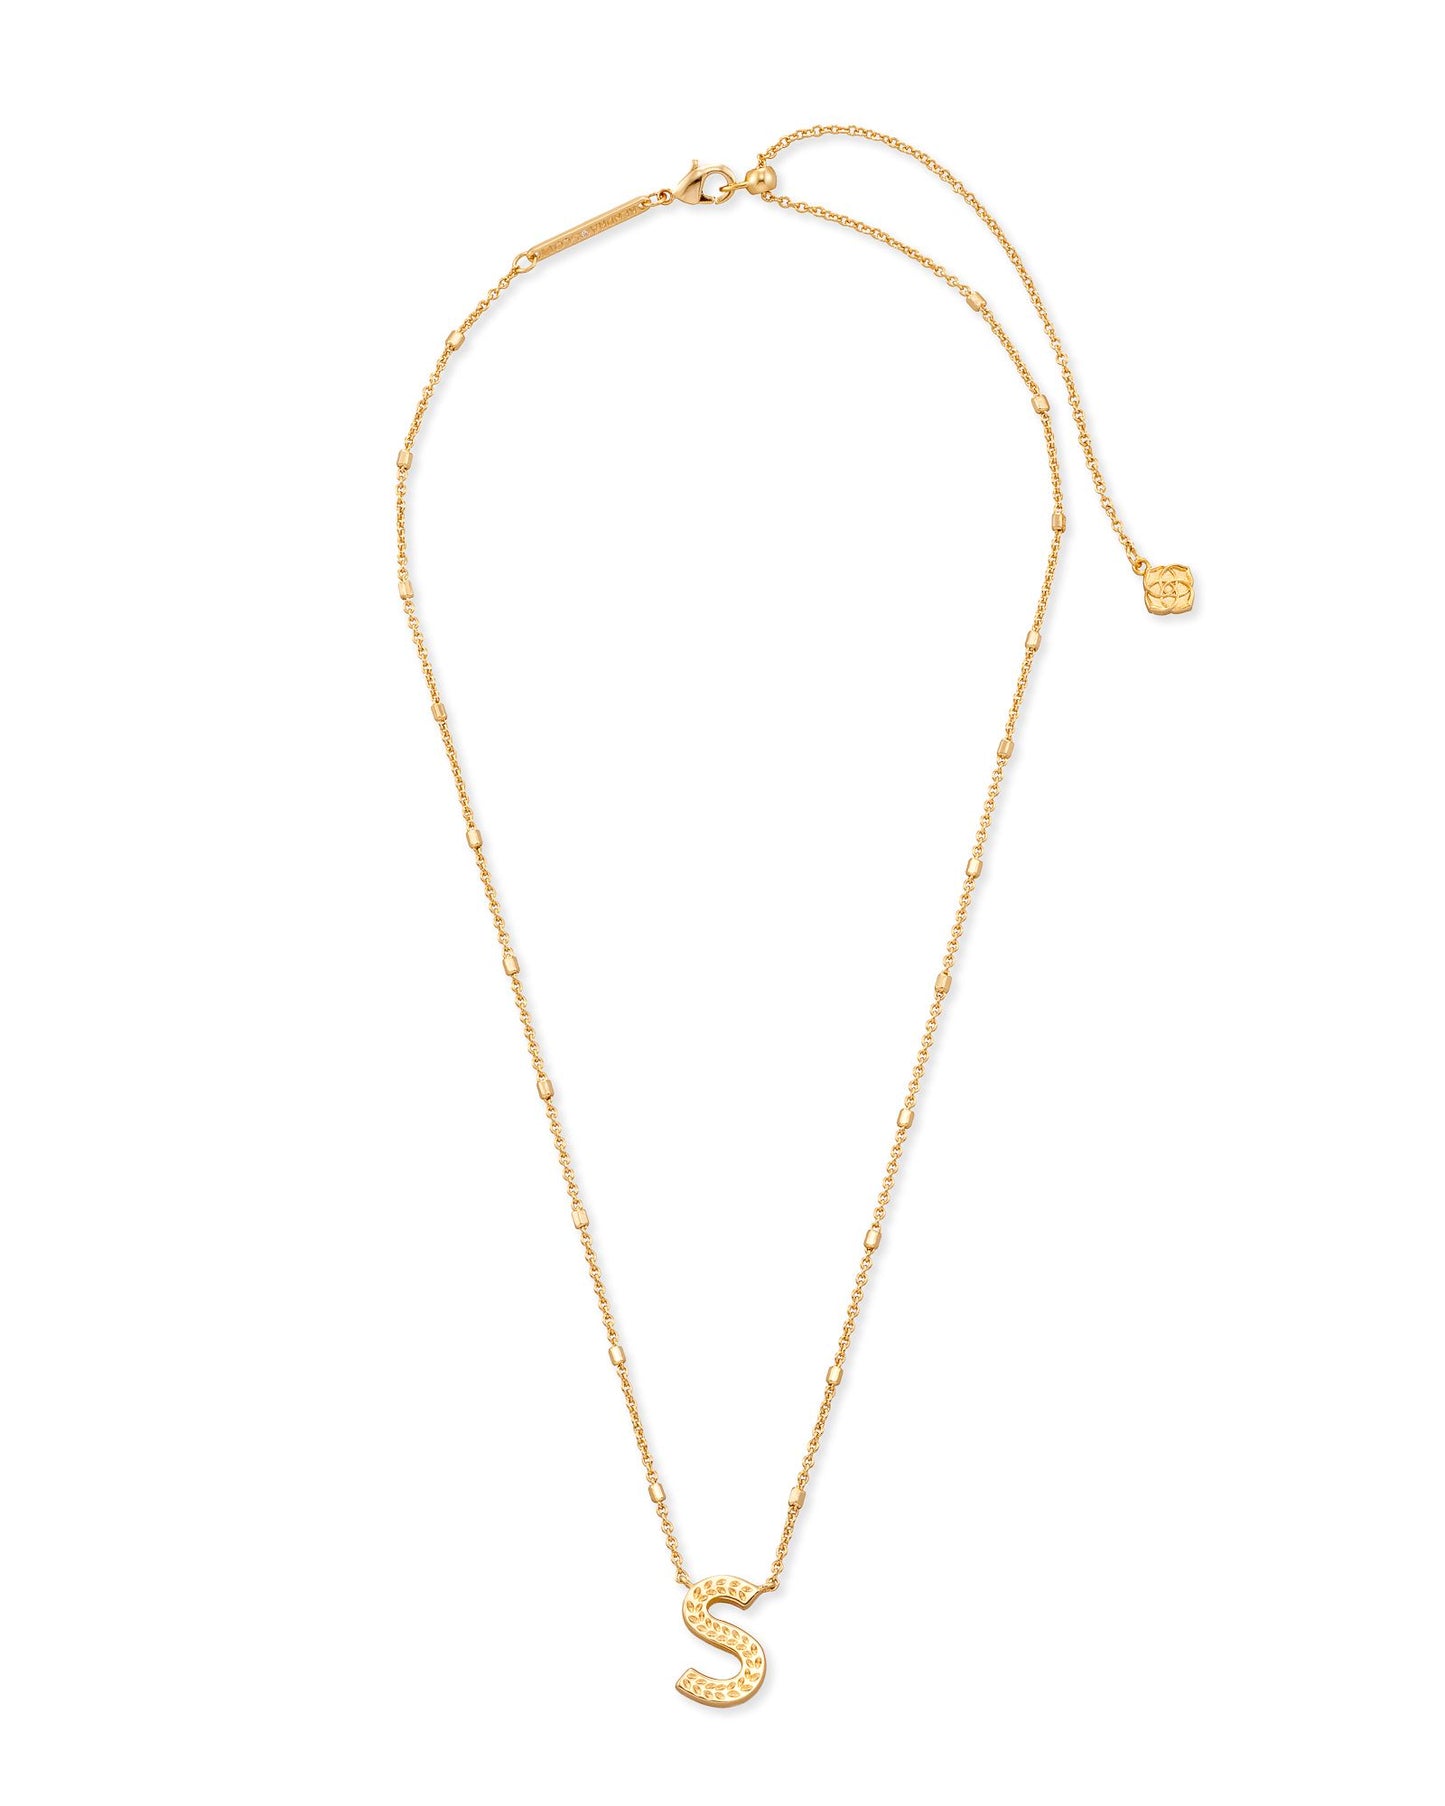 Kendra Scott Letter S Pendant Necklace Gold Metal-Necklaces-Kendra Scott-N1722GLD-S-The Twisted Chandelier